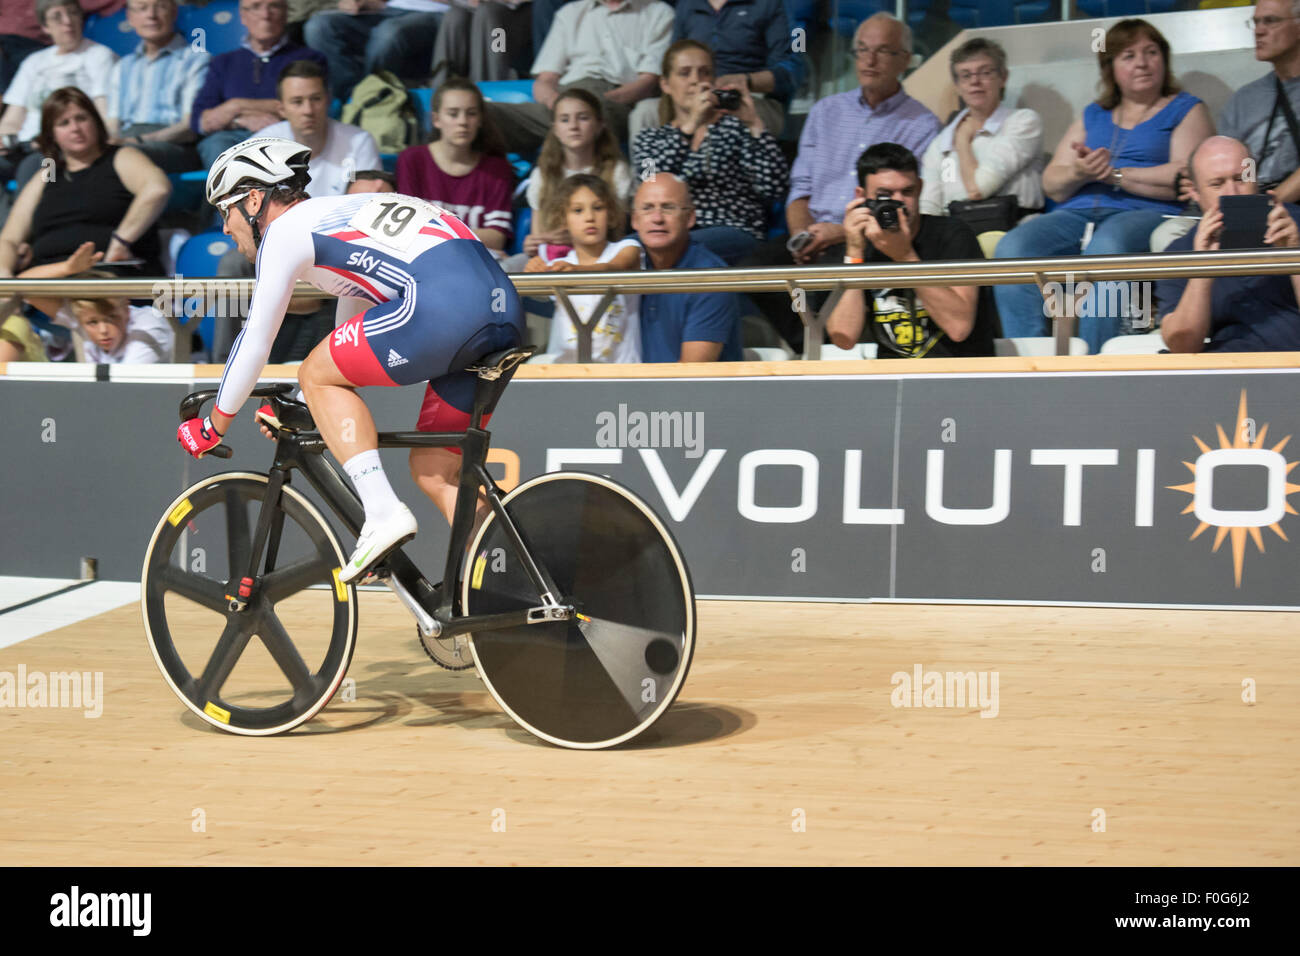 Derby, UK. 15th Aug, 2015. Mark Cavendish competes in the scratch race during the omnium at the Revolution Series at Derby Arena, Derby, United Kingdom on 15 August 2015. The Revolution Series is a professional track racing series featuring many of the world's best track cyclists. This event, taking place over 3 days from 14-16 August 2015, is an important preparation event for the Rio 2016 Olympic Games, allowing British riders to score qualifying points for the Games. Credit:  Andrew Peat/Alamy Live News Stock Photo